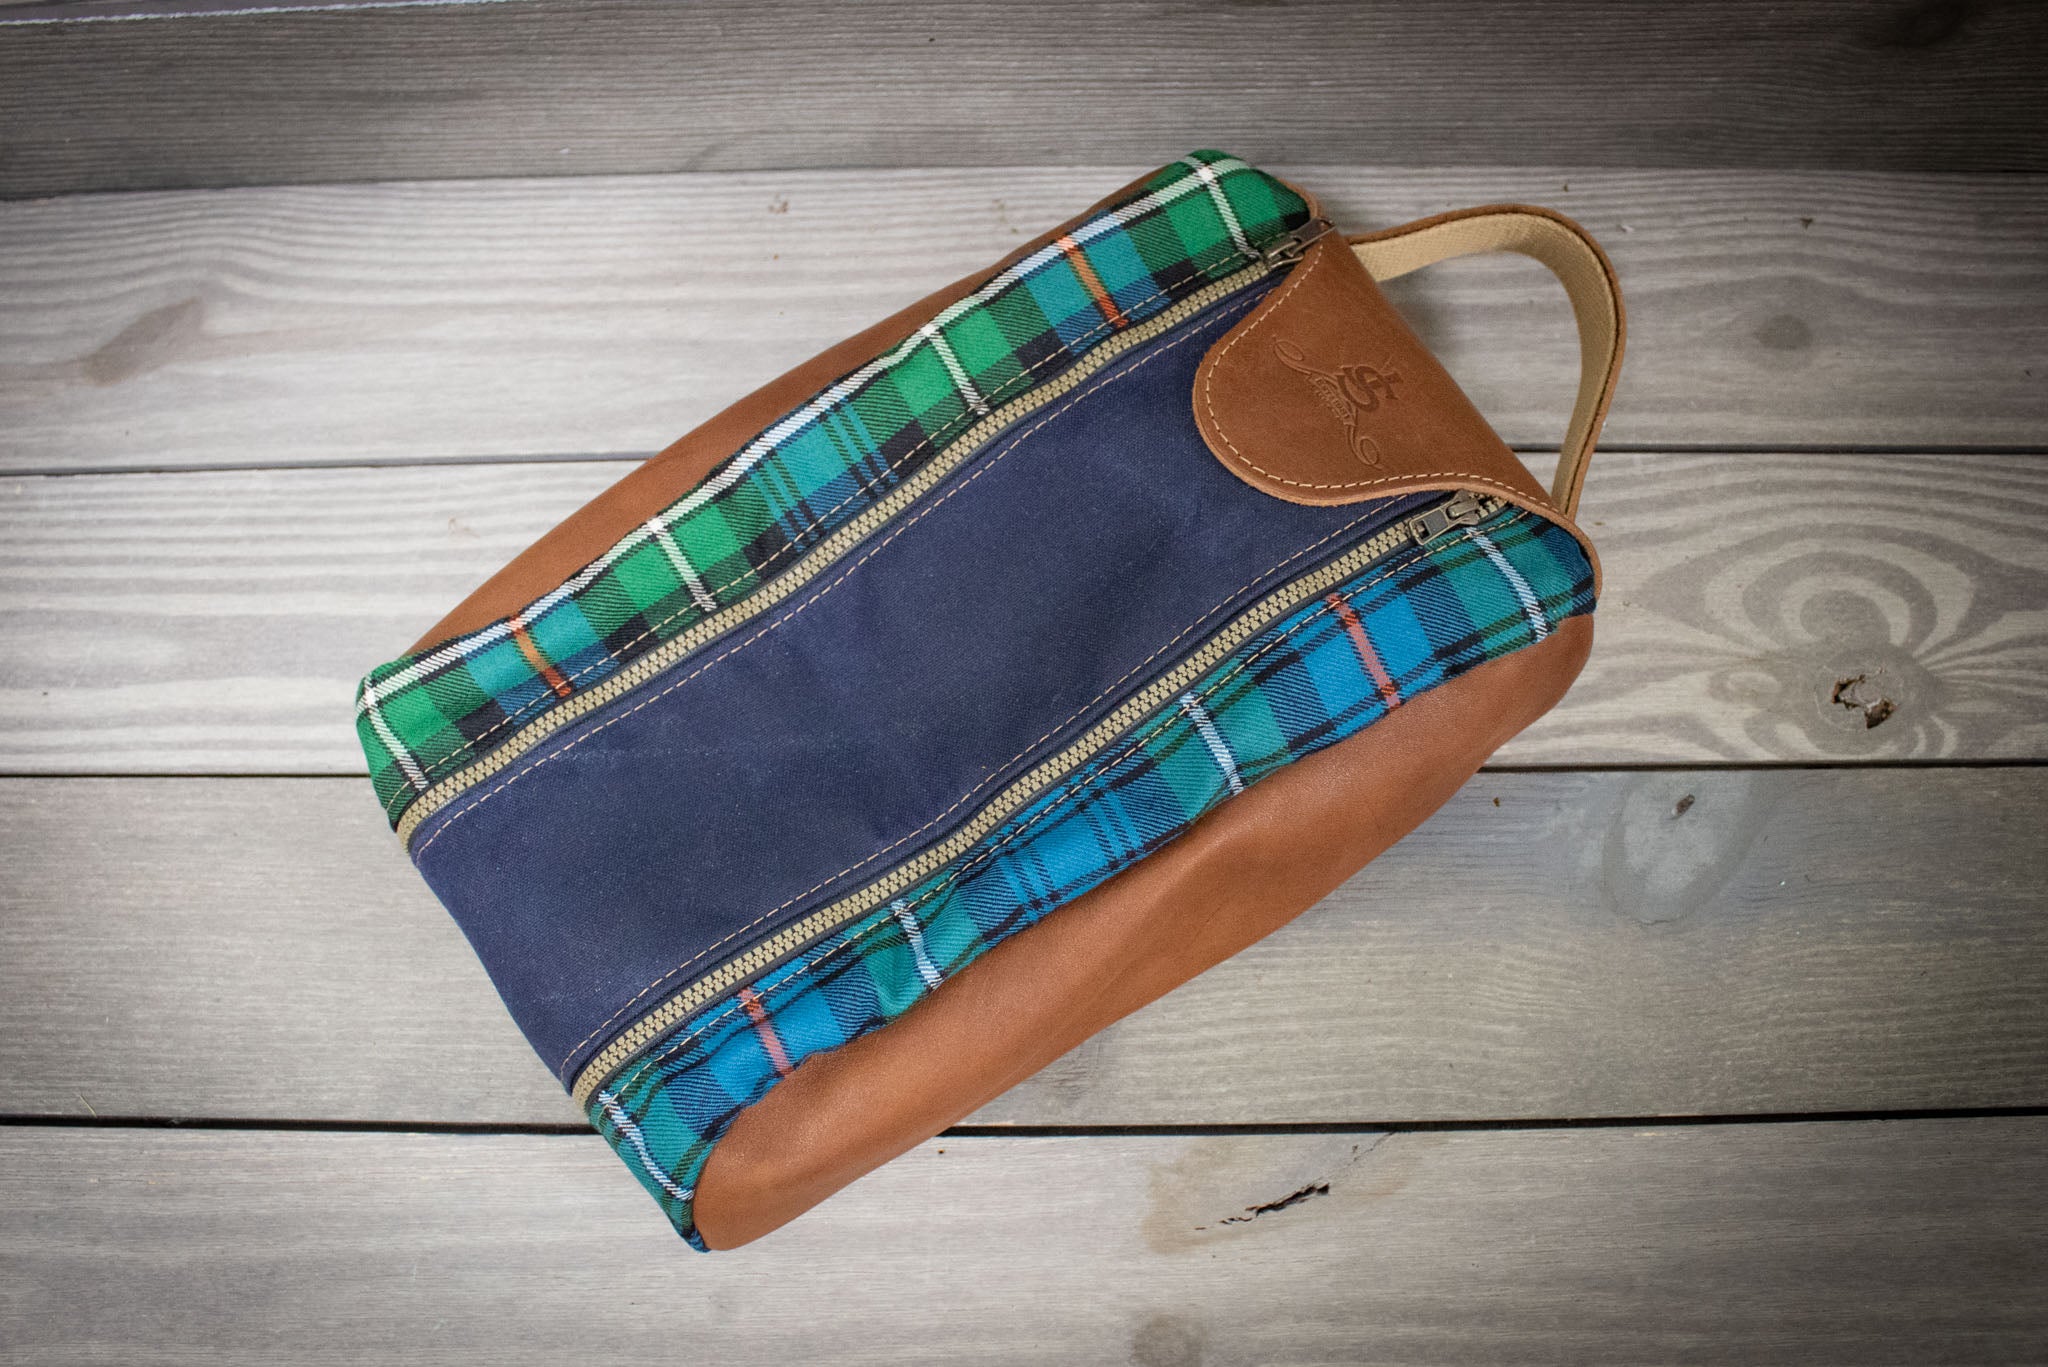 Tartan and Leather Shoe Bag - Steurer & Jacoby